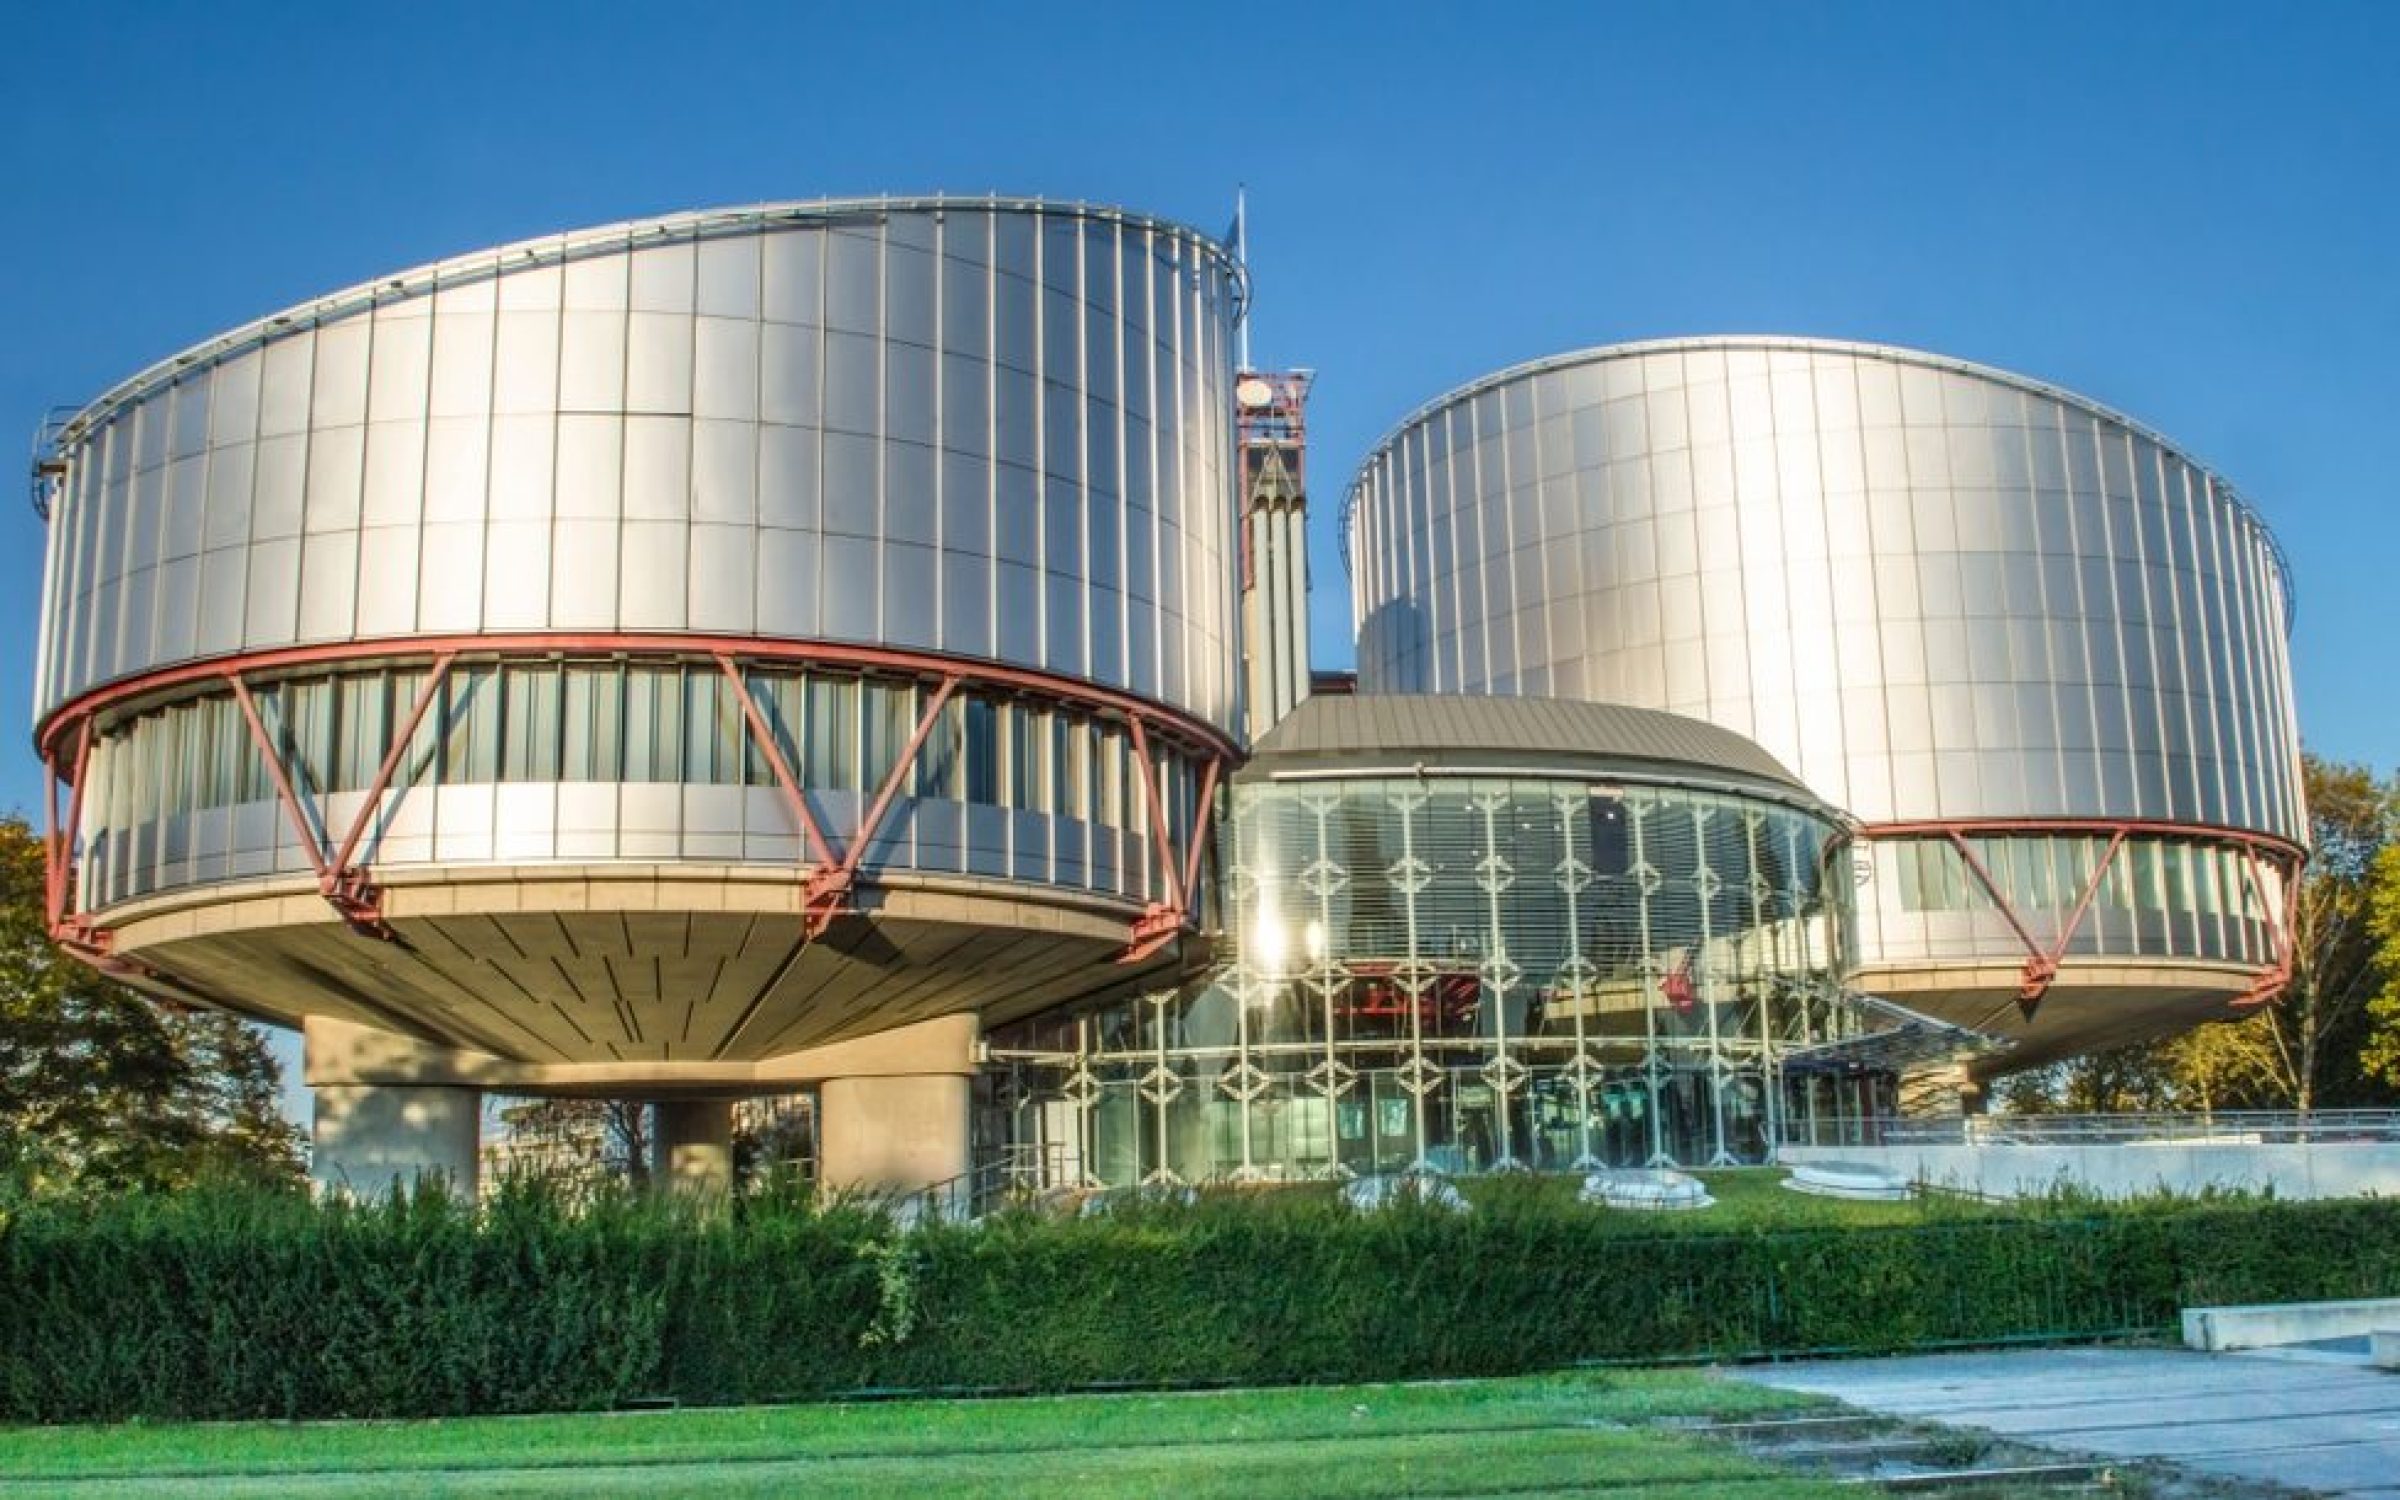 The European Court of Human Rights (ECHR) in Strasbourg, France.